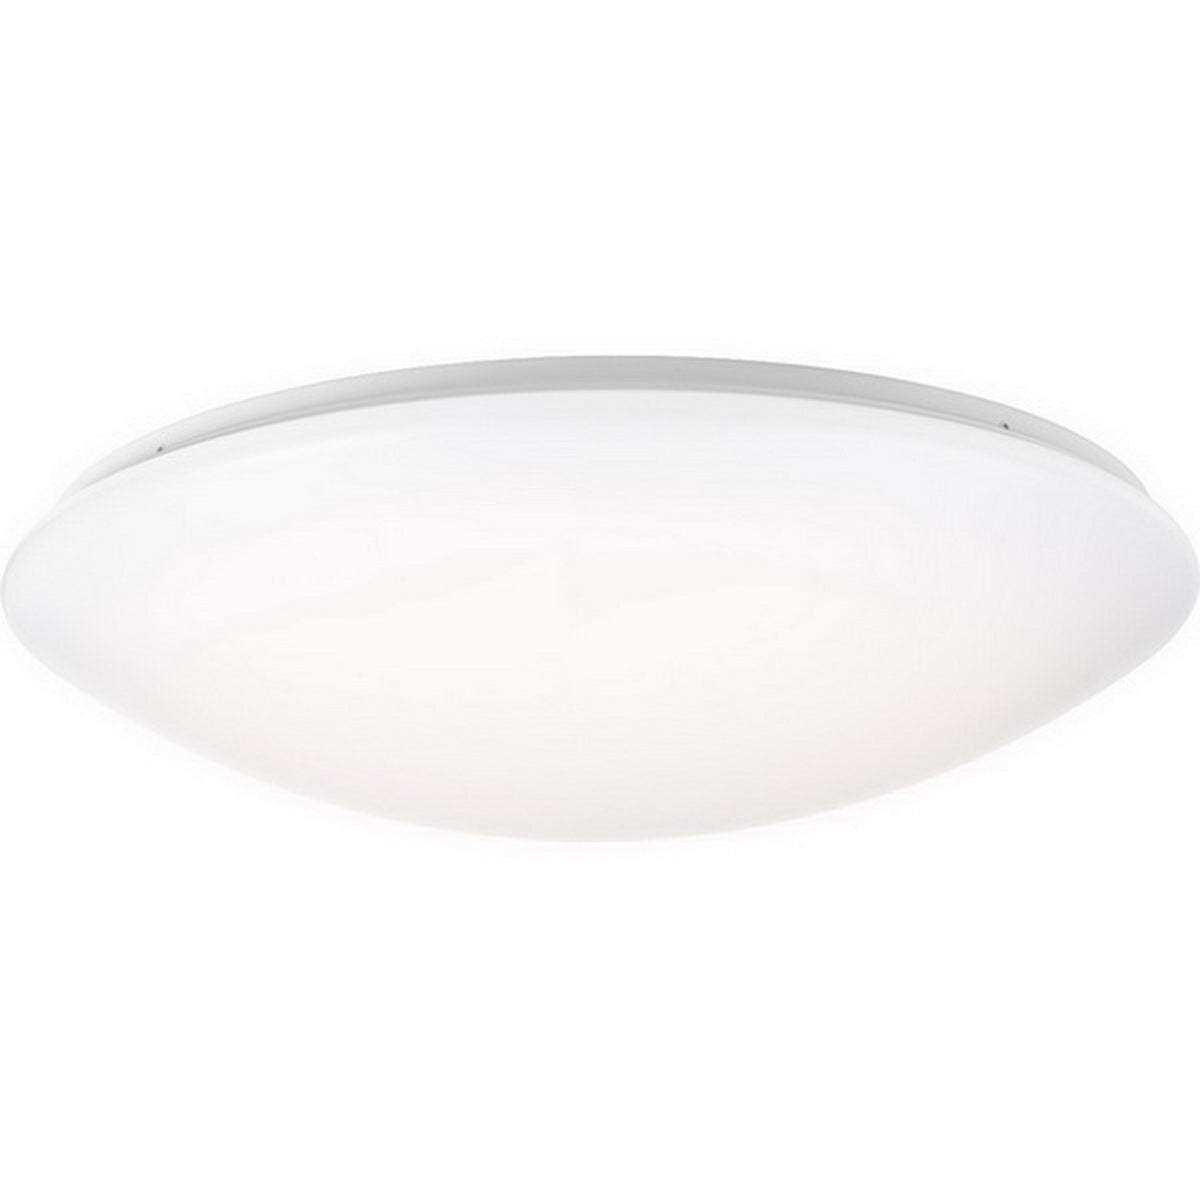 Drums and Clouds 17 in LED Ceiling Puff Light 3000 Lumens 3000K White finish